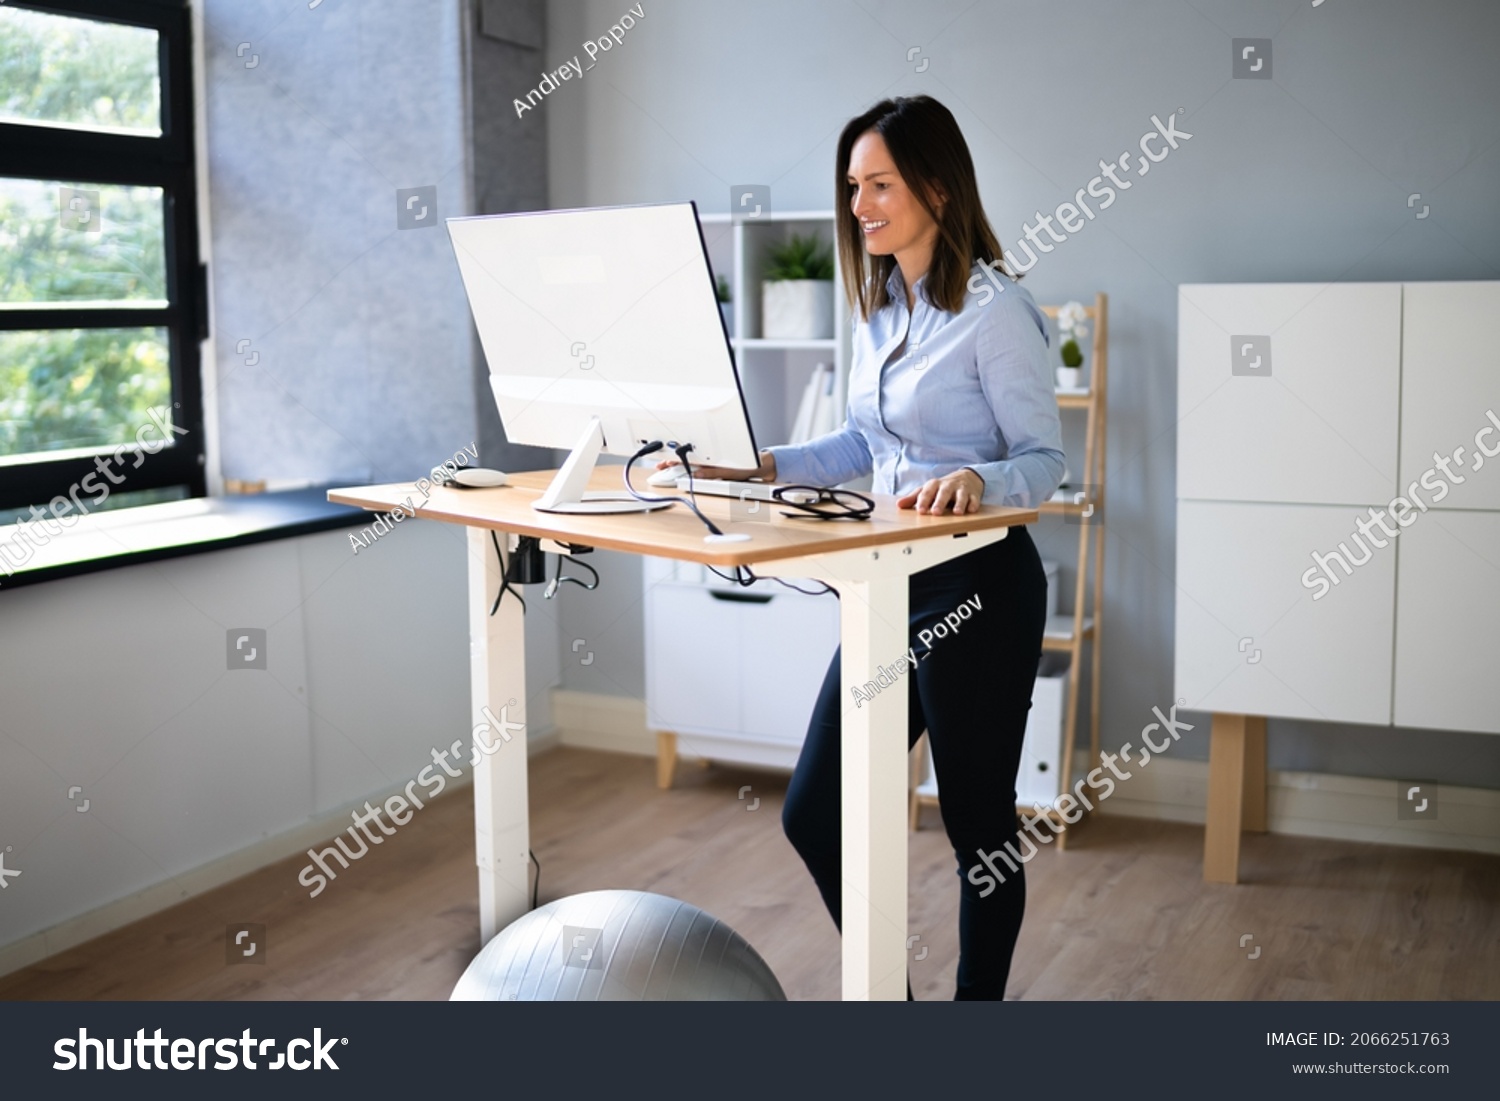 Woman Using Adjustable Height Standing Desk In Office For Good Posture #2066251763